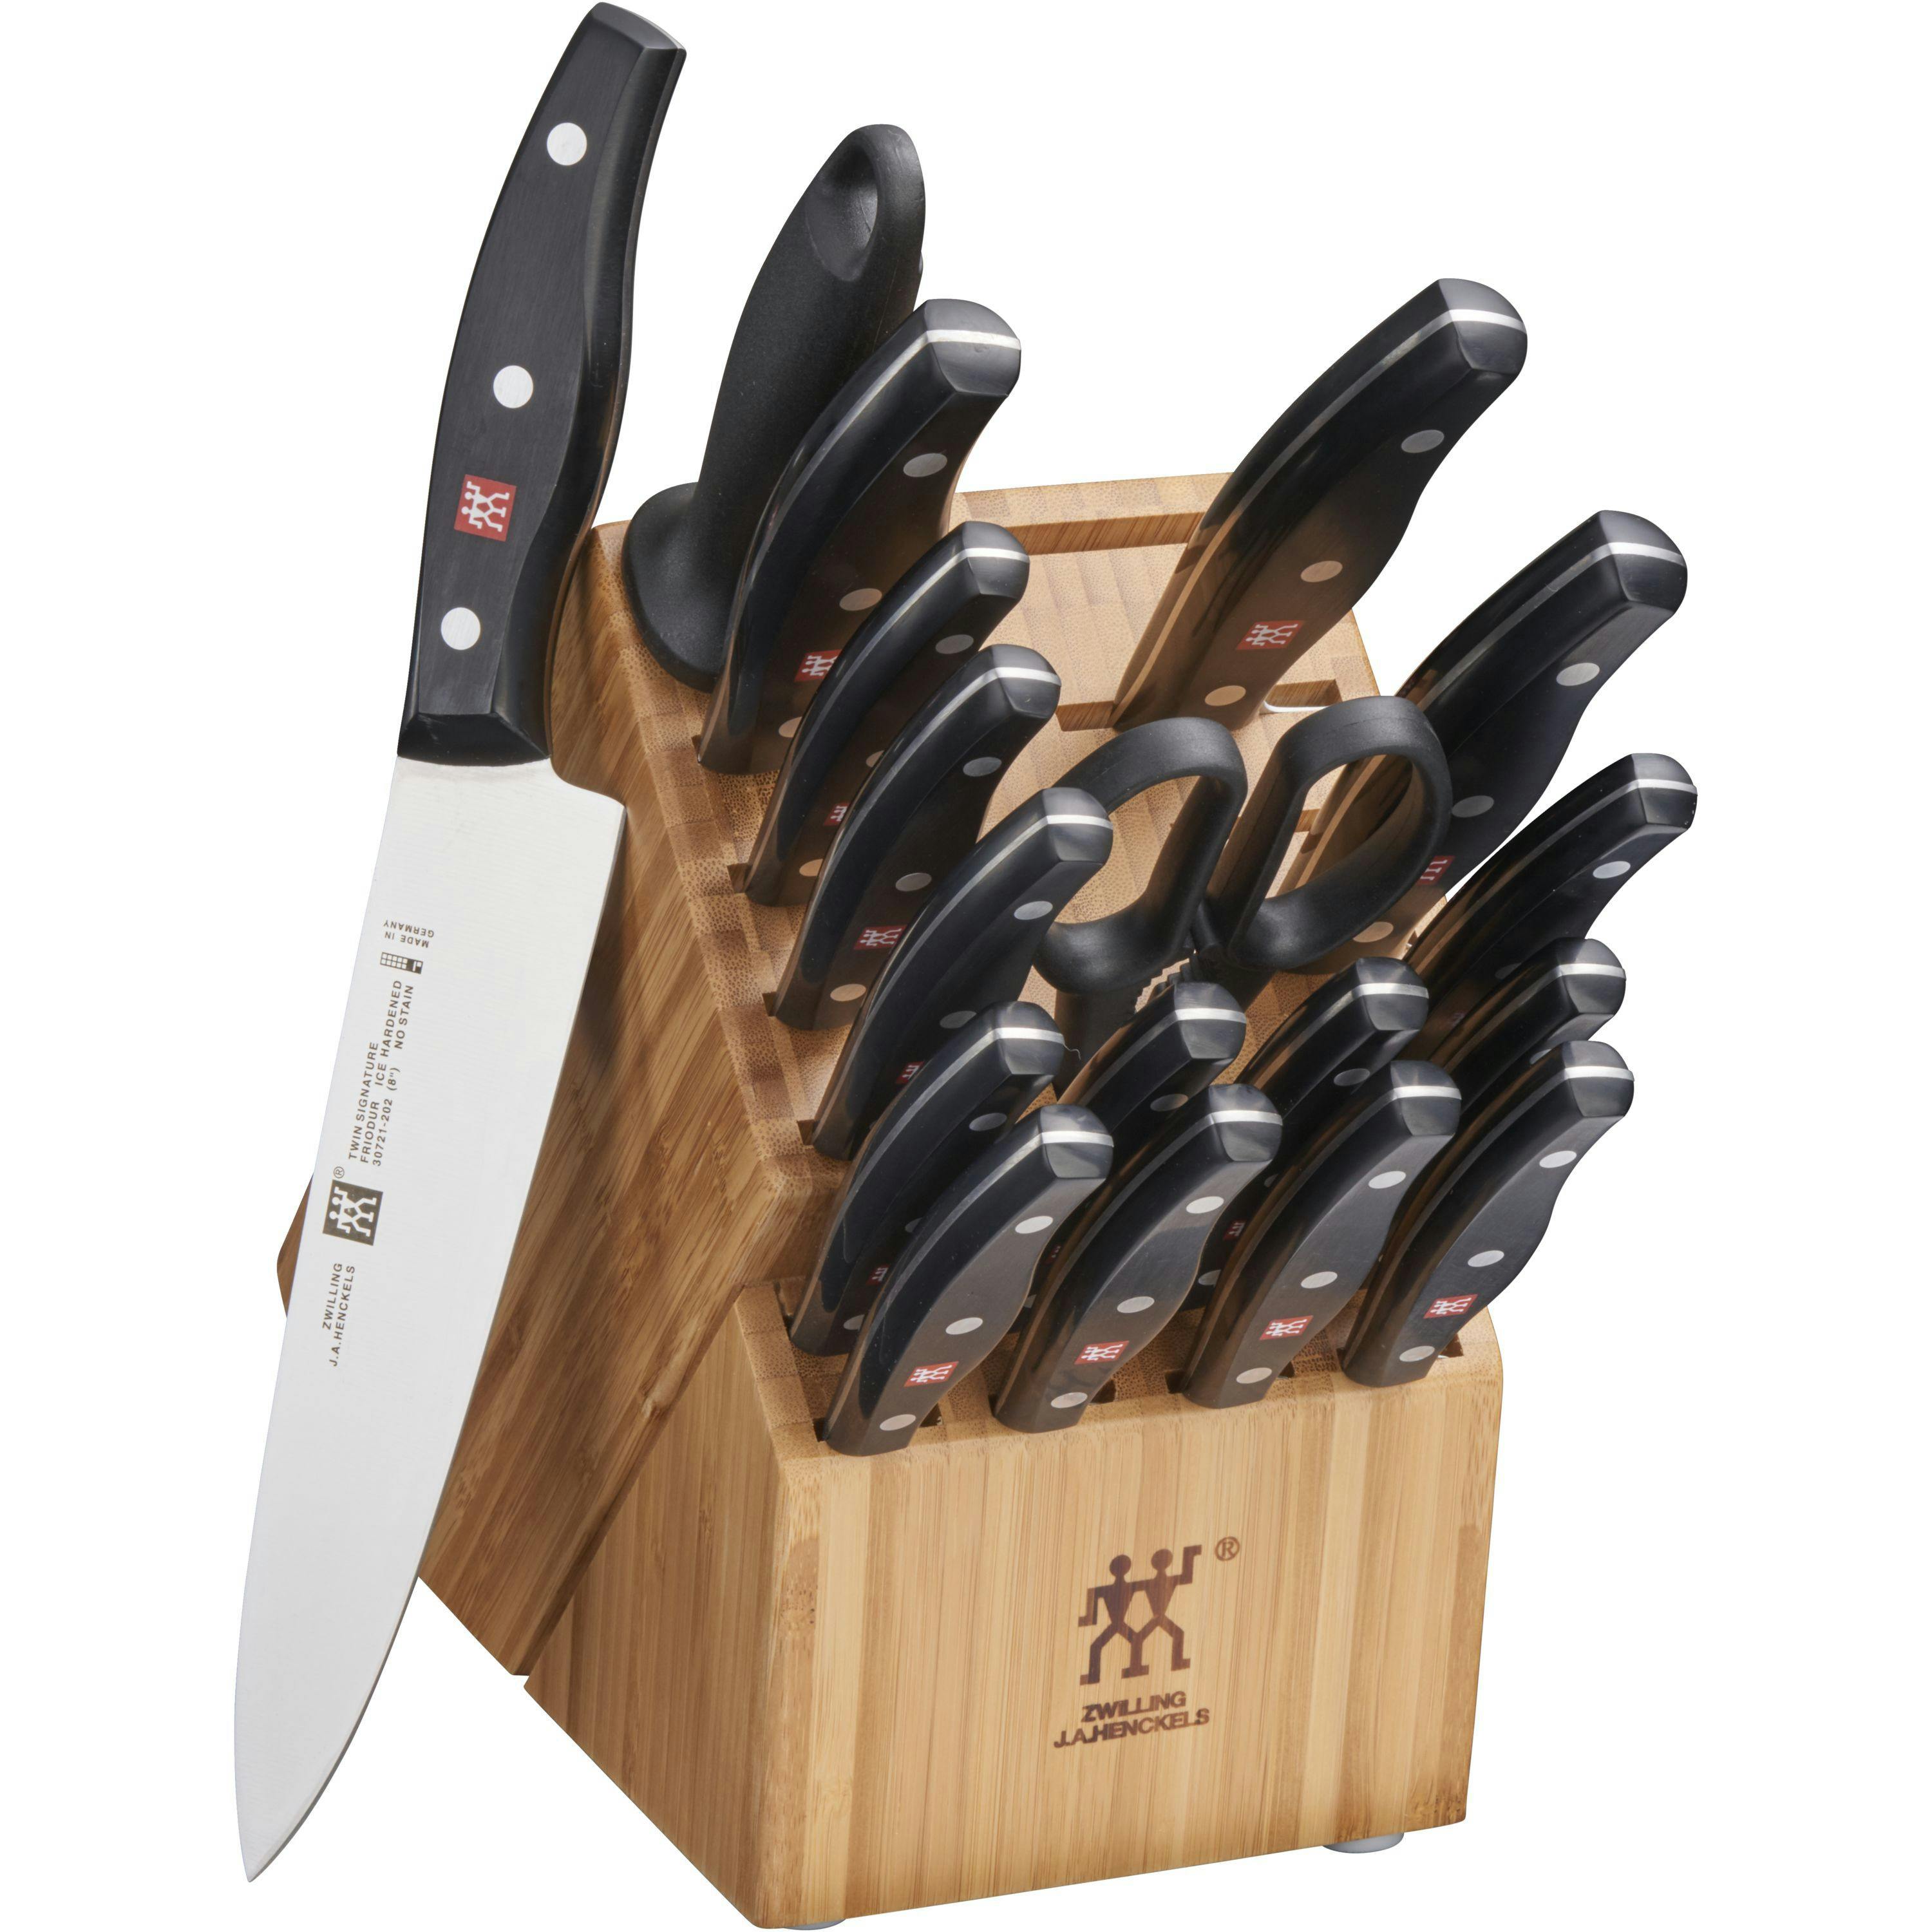 Zwilling Twin Signature 19-Piece Knife Set For Kitchen, Chef Knife, Professional Chef Knife Set, German Knife Set With Block, Light Brown